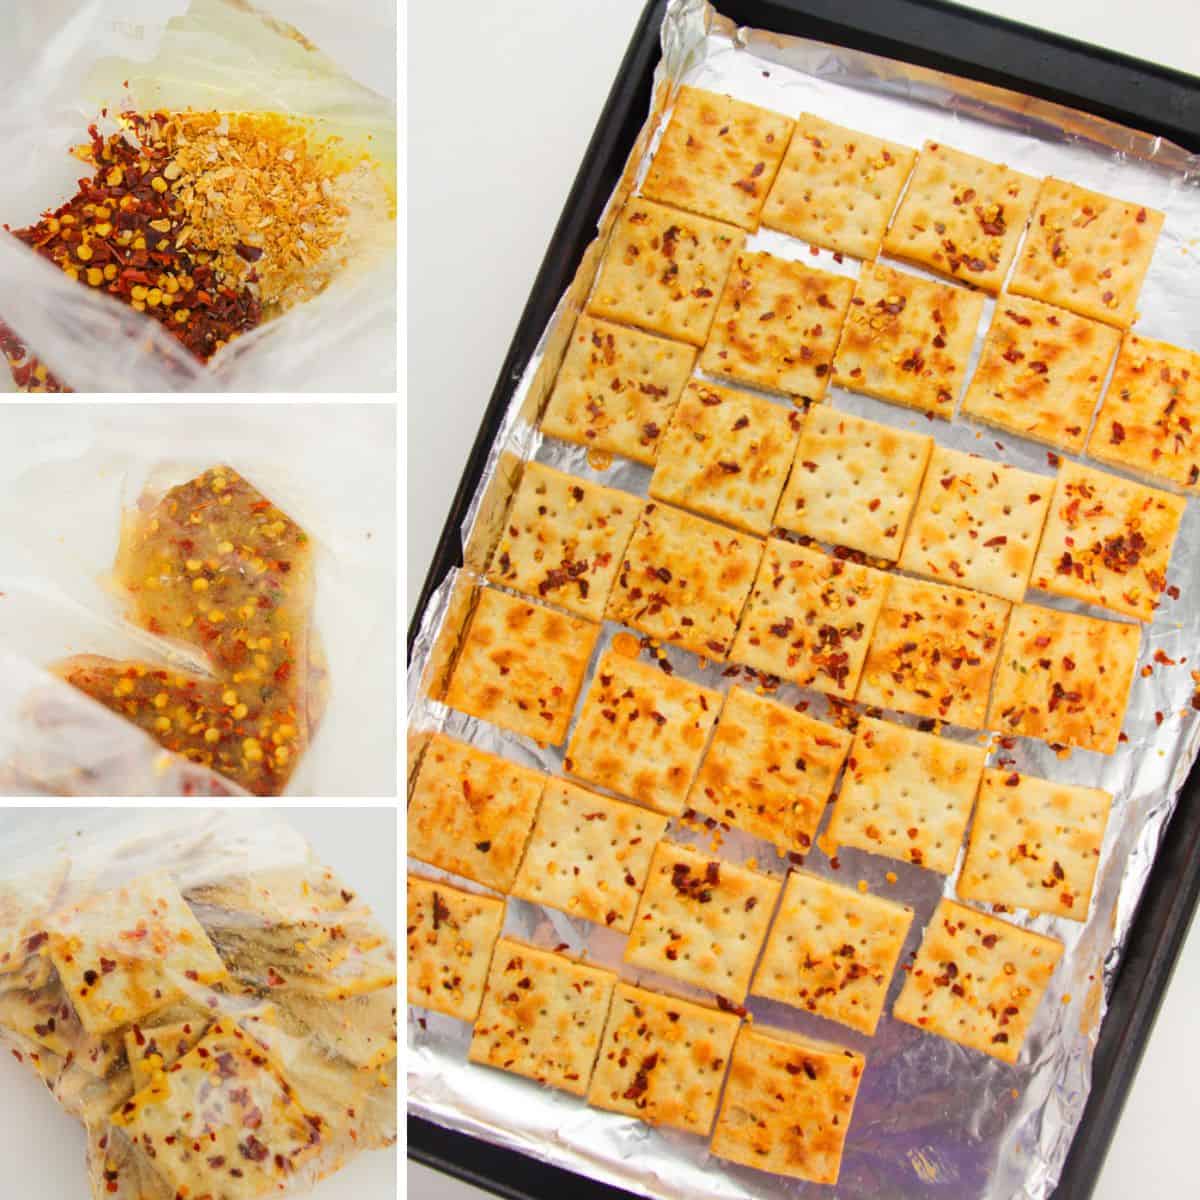 Four image collage of steps to make fire crackers including: adding oil and seasonings to bag, ingredients mixed together in bag, crackers coated in seasonings in bag, and seasoned crackers on foil-lined baking sheet.